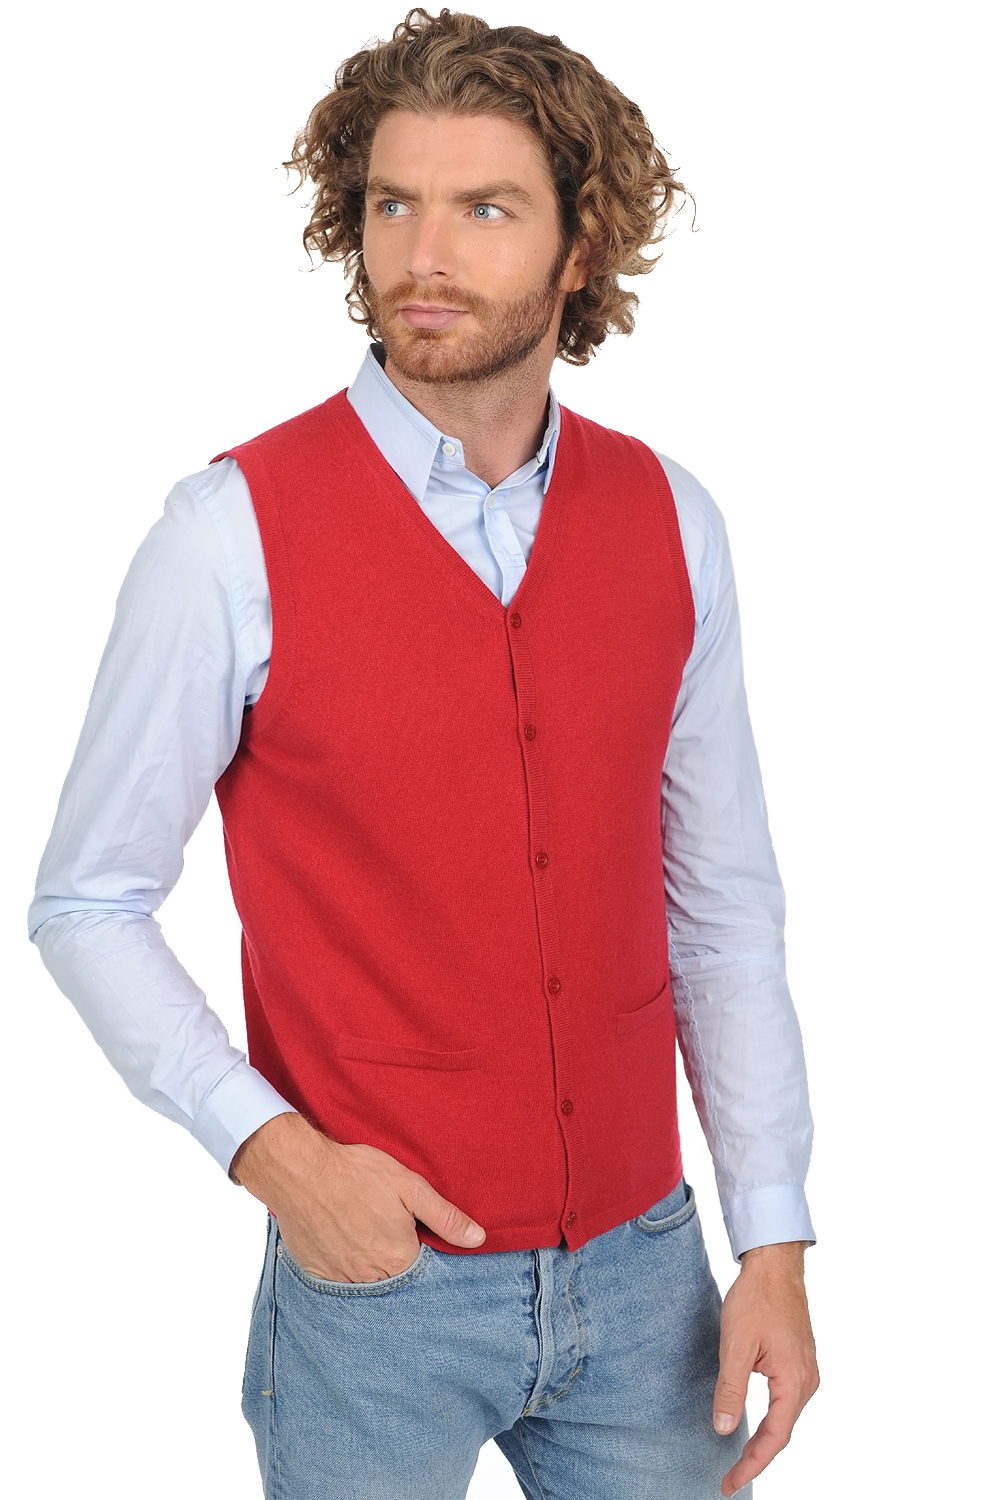 Cashmere men timeless classics basile blood red xs